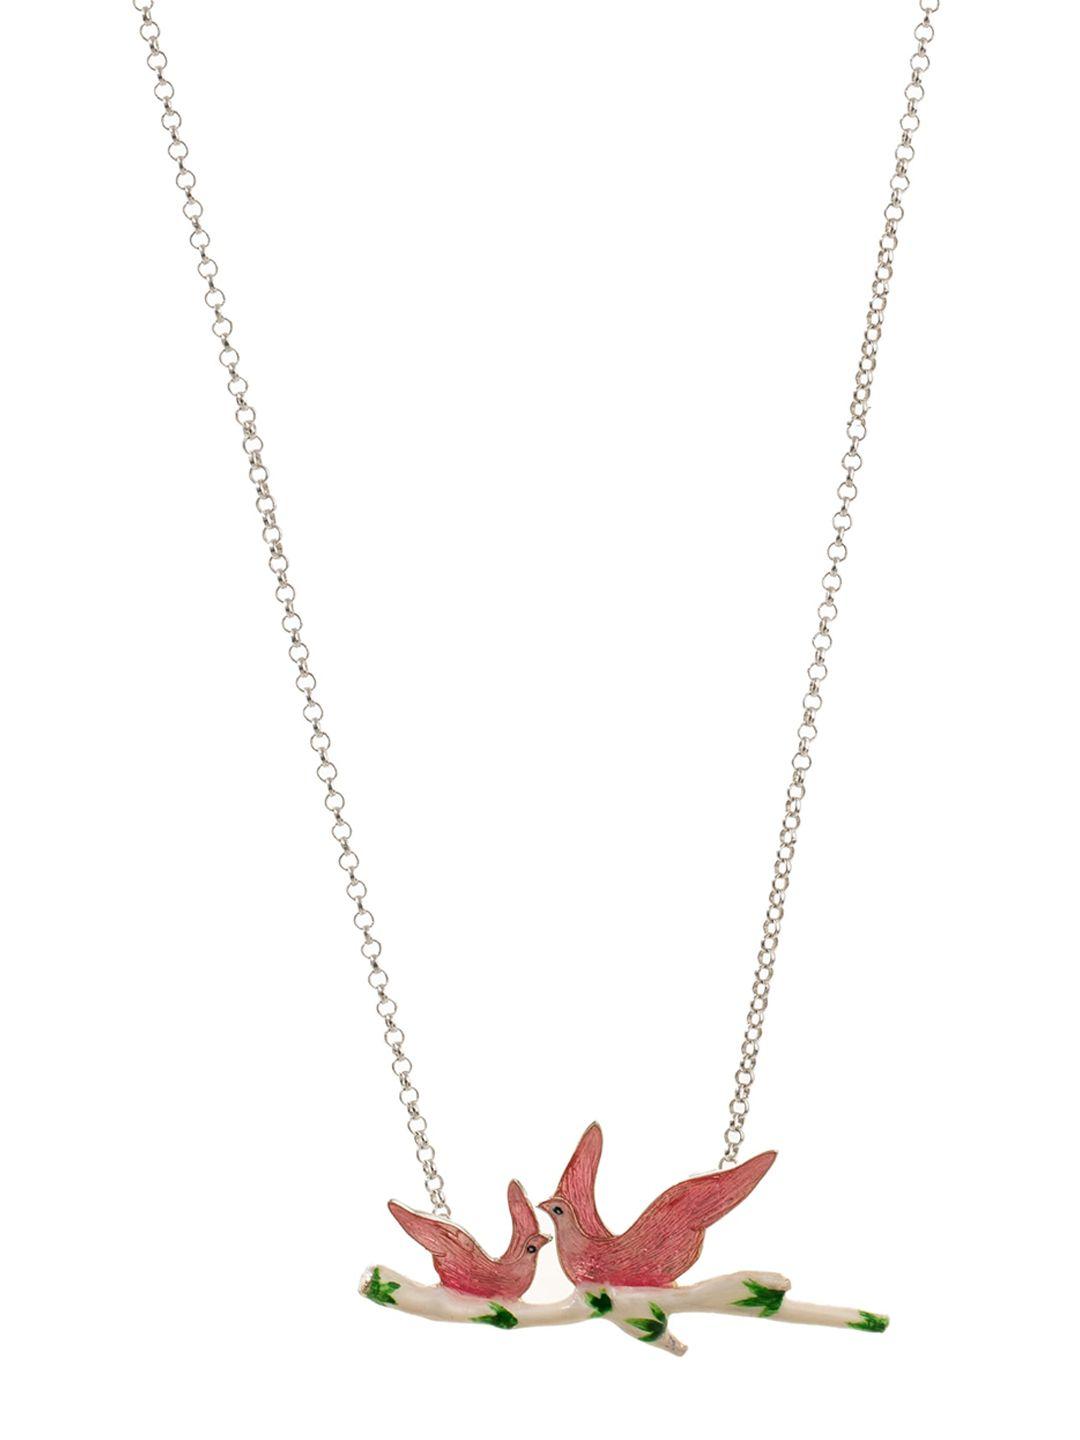 kicky-and-perky-925-sterling-silver-enamel-bird-pendant-with-chain